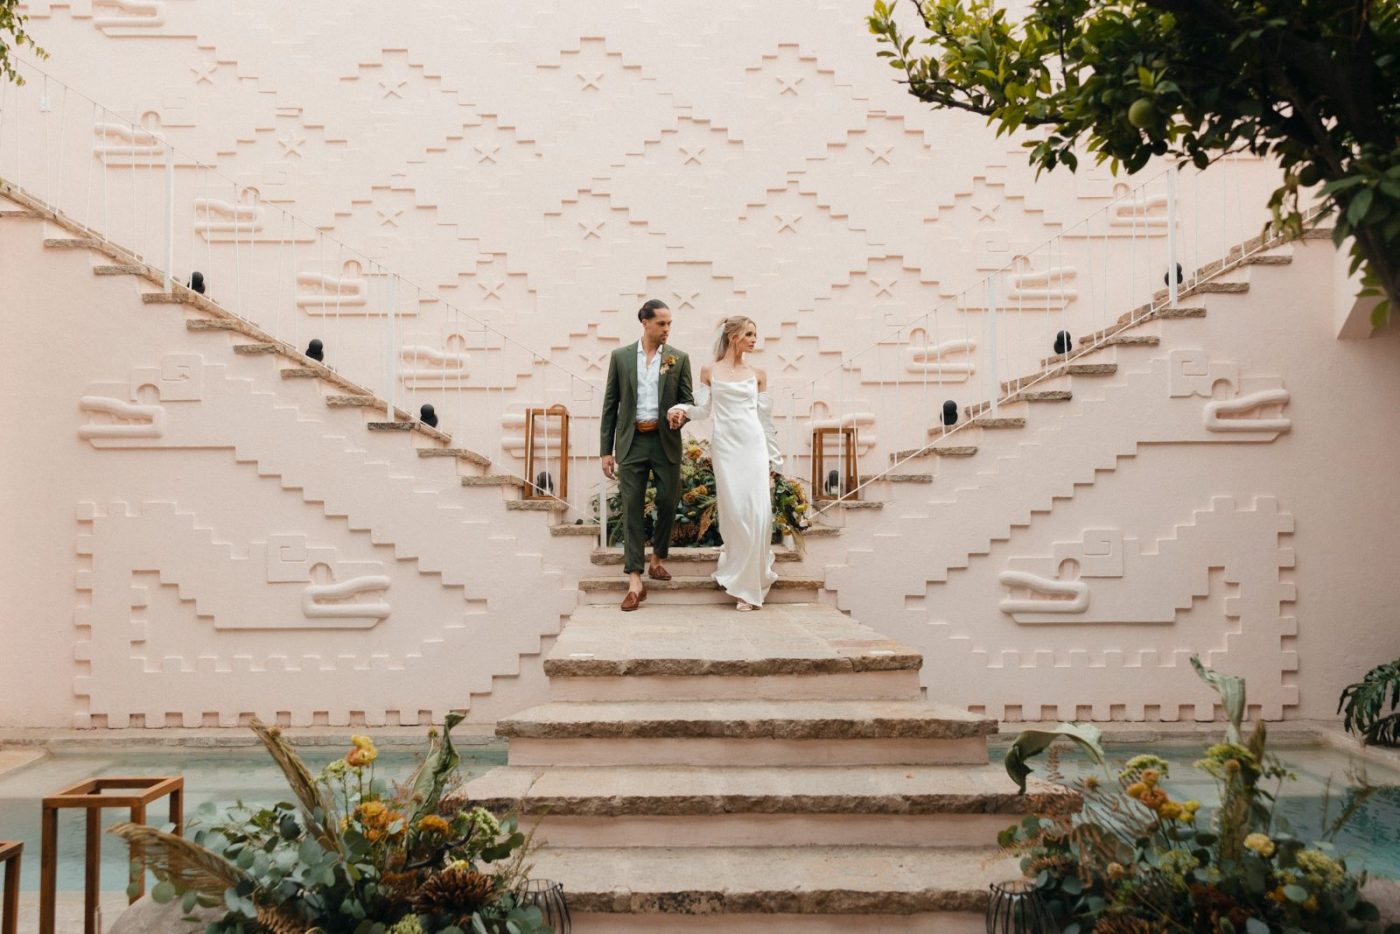 The Best Venues for a Small, Intimate Wedding Abroad